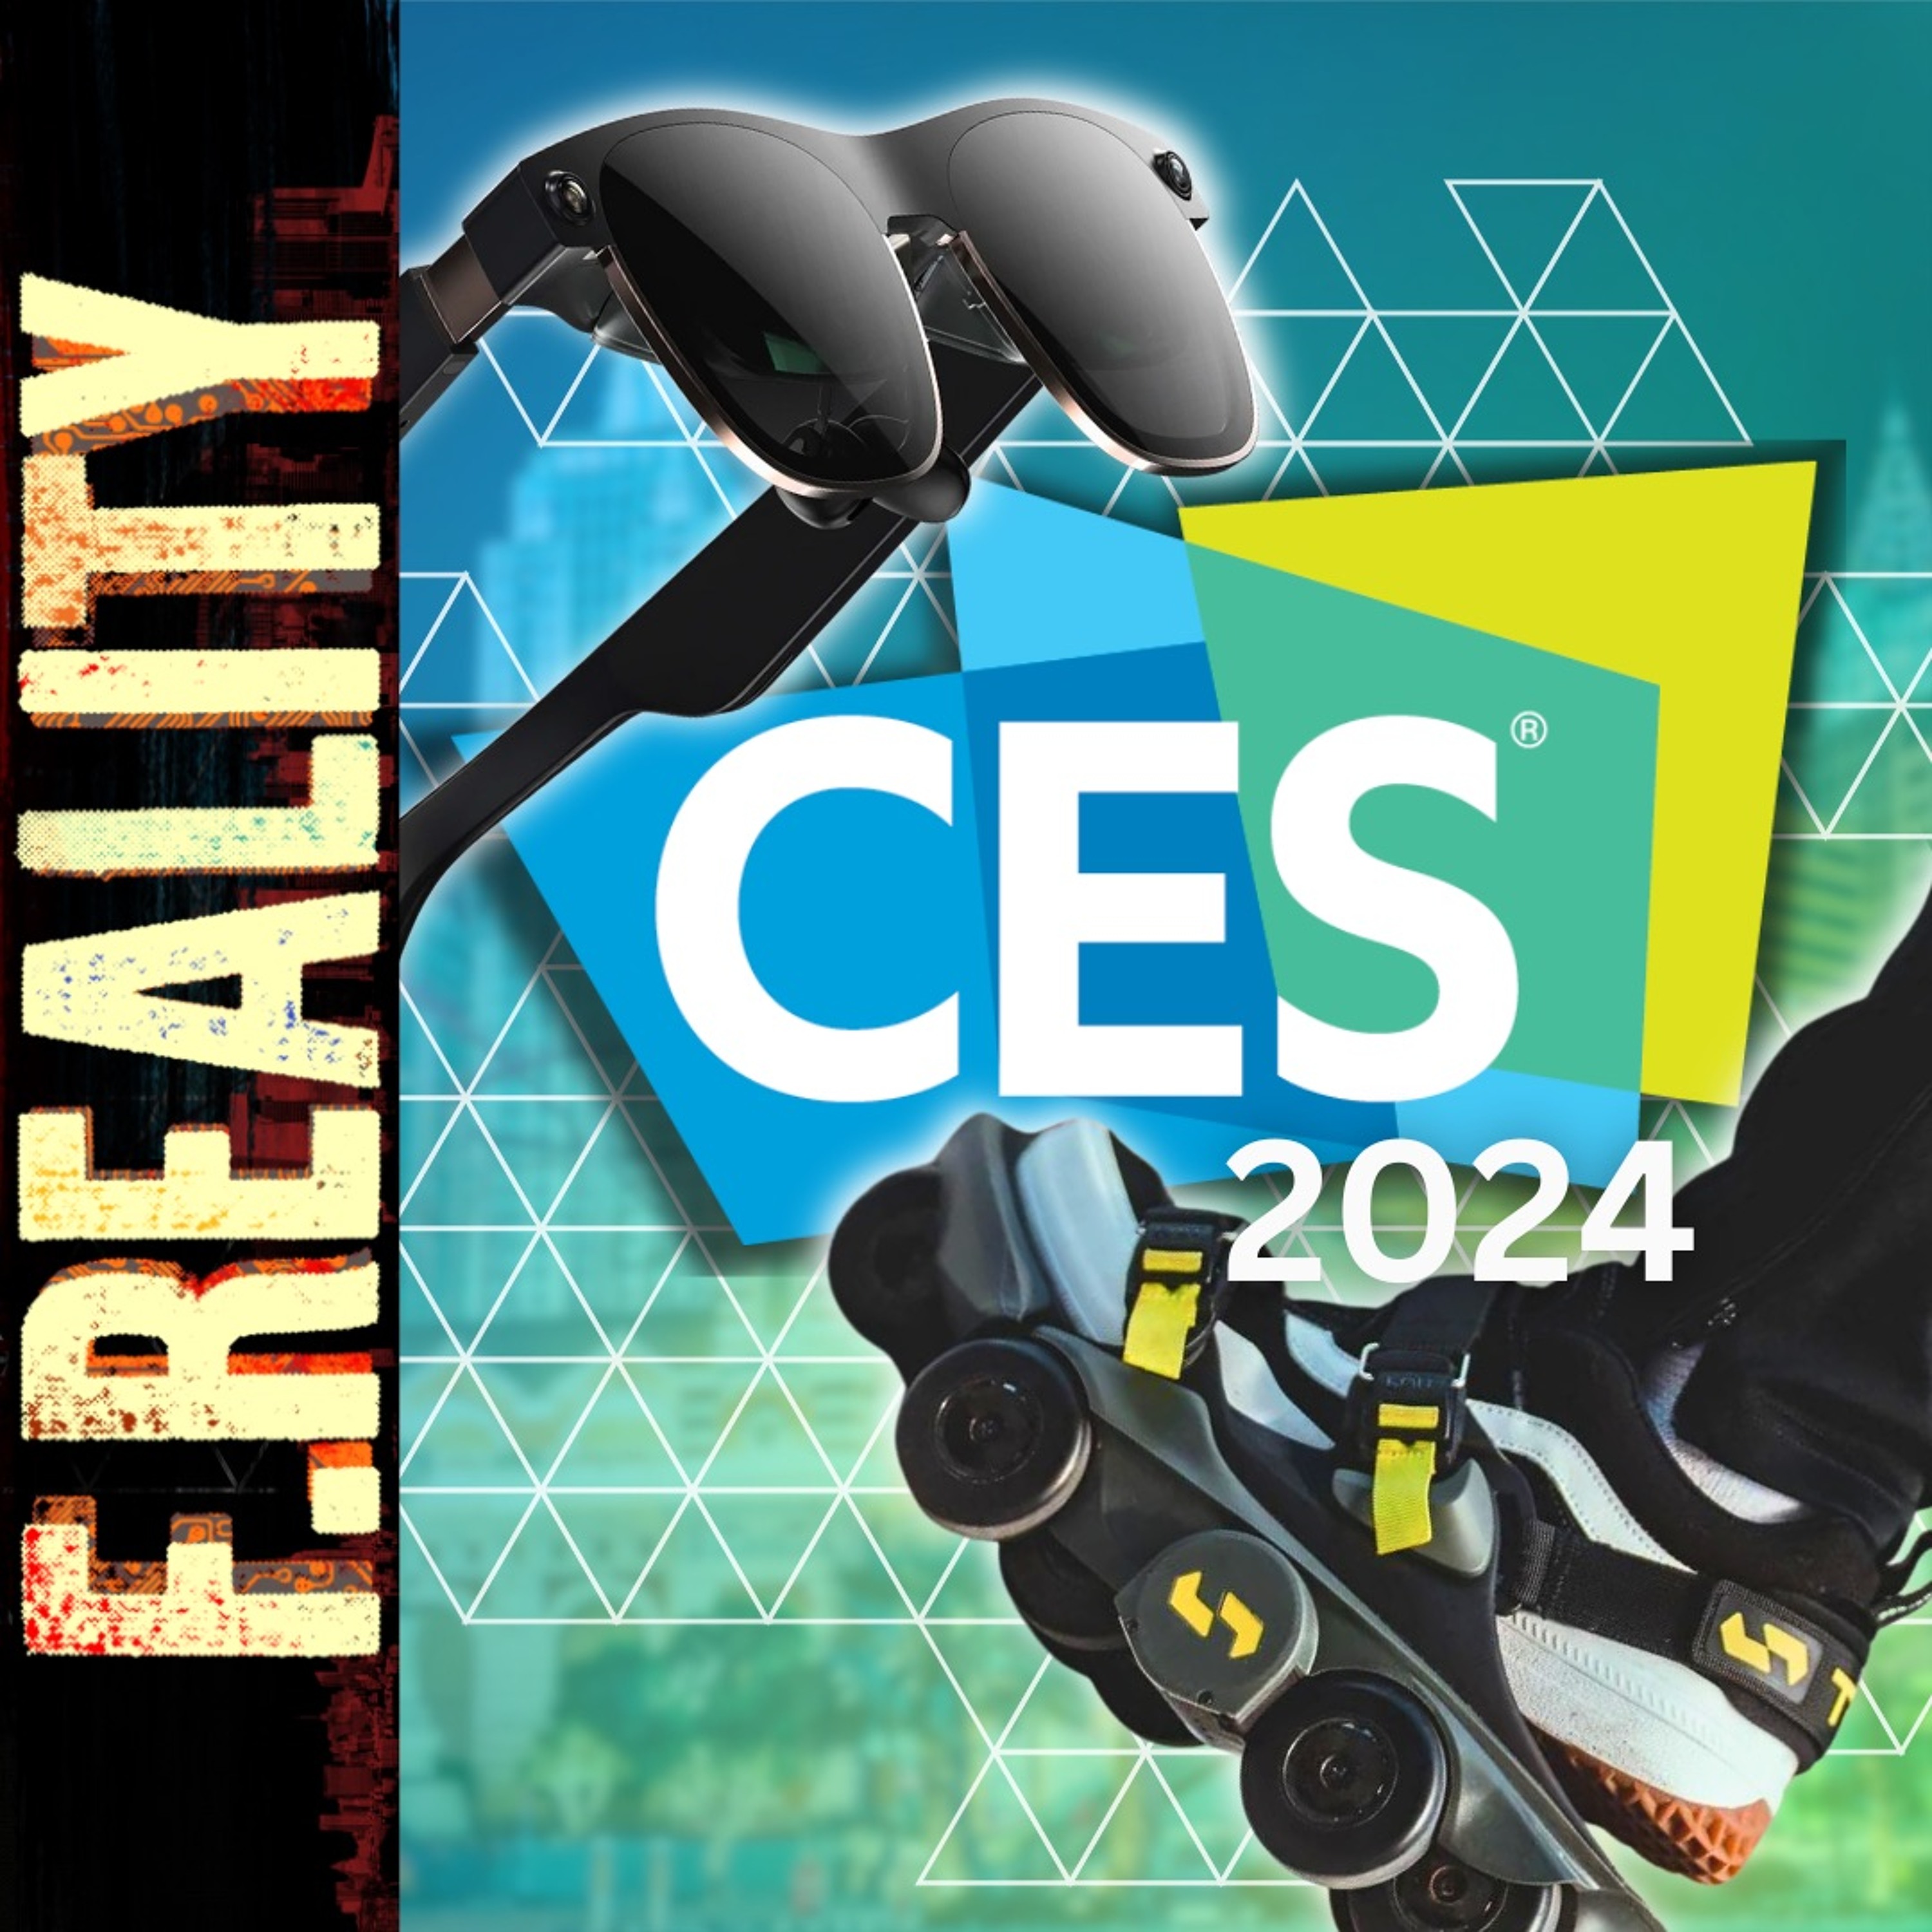 Ep 242 - Breaking Down the Biggest XR Reveals at CES 2024